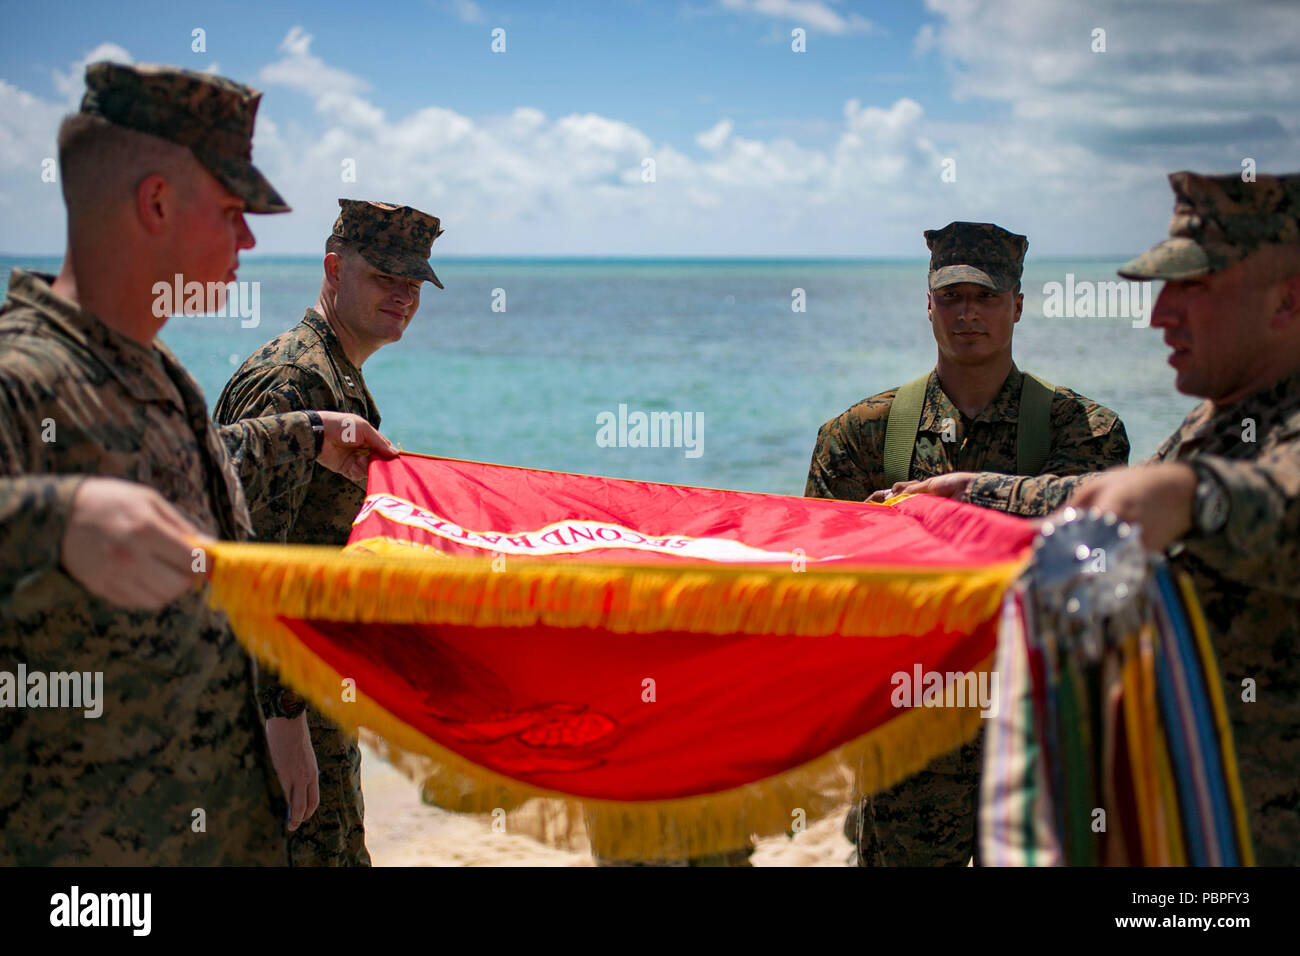 U.S. Marines assigned to 2nd Battalion, 8th Marine Regiment, stow away their battle colors after a battle sites tour in Tarawa, Kiribati, July 22, 2018. The tour was held on the 75th anniversary of the battalion’s assault on Red Beach 3 to foster the battalion’s history program and incentivize outstanding performance for select Marines and Sailors. 2/8 is forward deployed to 3rd Marine Division in Okinawa, Japan as part of the unit Deployment Program. (U.S. Marine Corps photo by Cpl. Charles Plouffe) Stock Photo